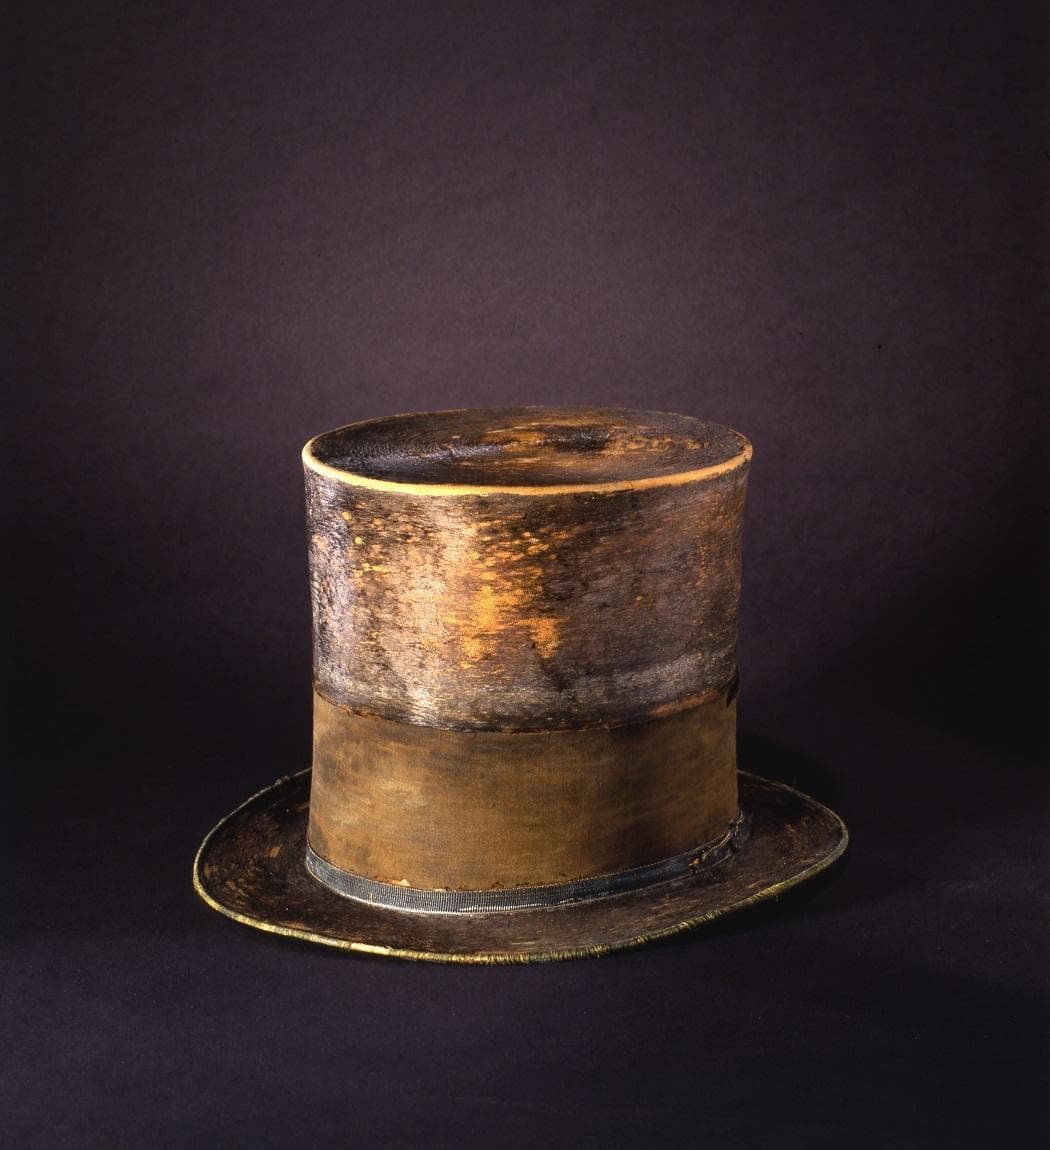 Item #34: Abraham Lincoln's hat. The signature top-hat of the President who faced the nation's greatest challenge becomes a national treasure.